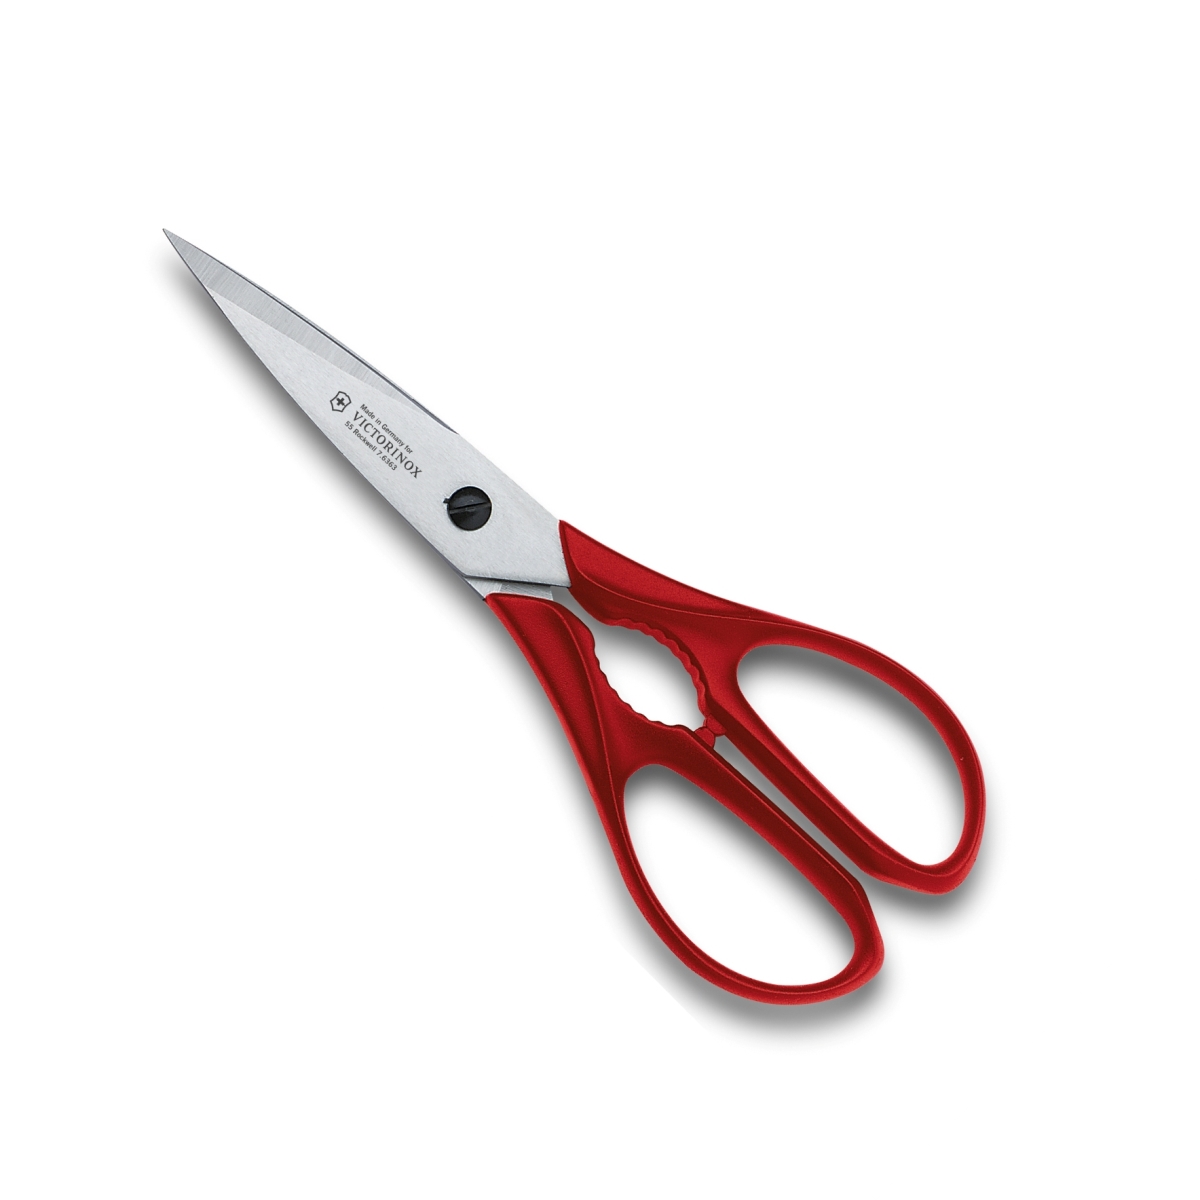 Swiss Army Brands Vic-87770 2019 Victorinox Utility Kitchen Scissors & Shears With Bottle Opener, Red - 4 In.